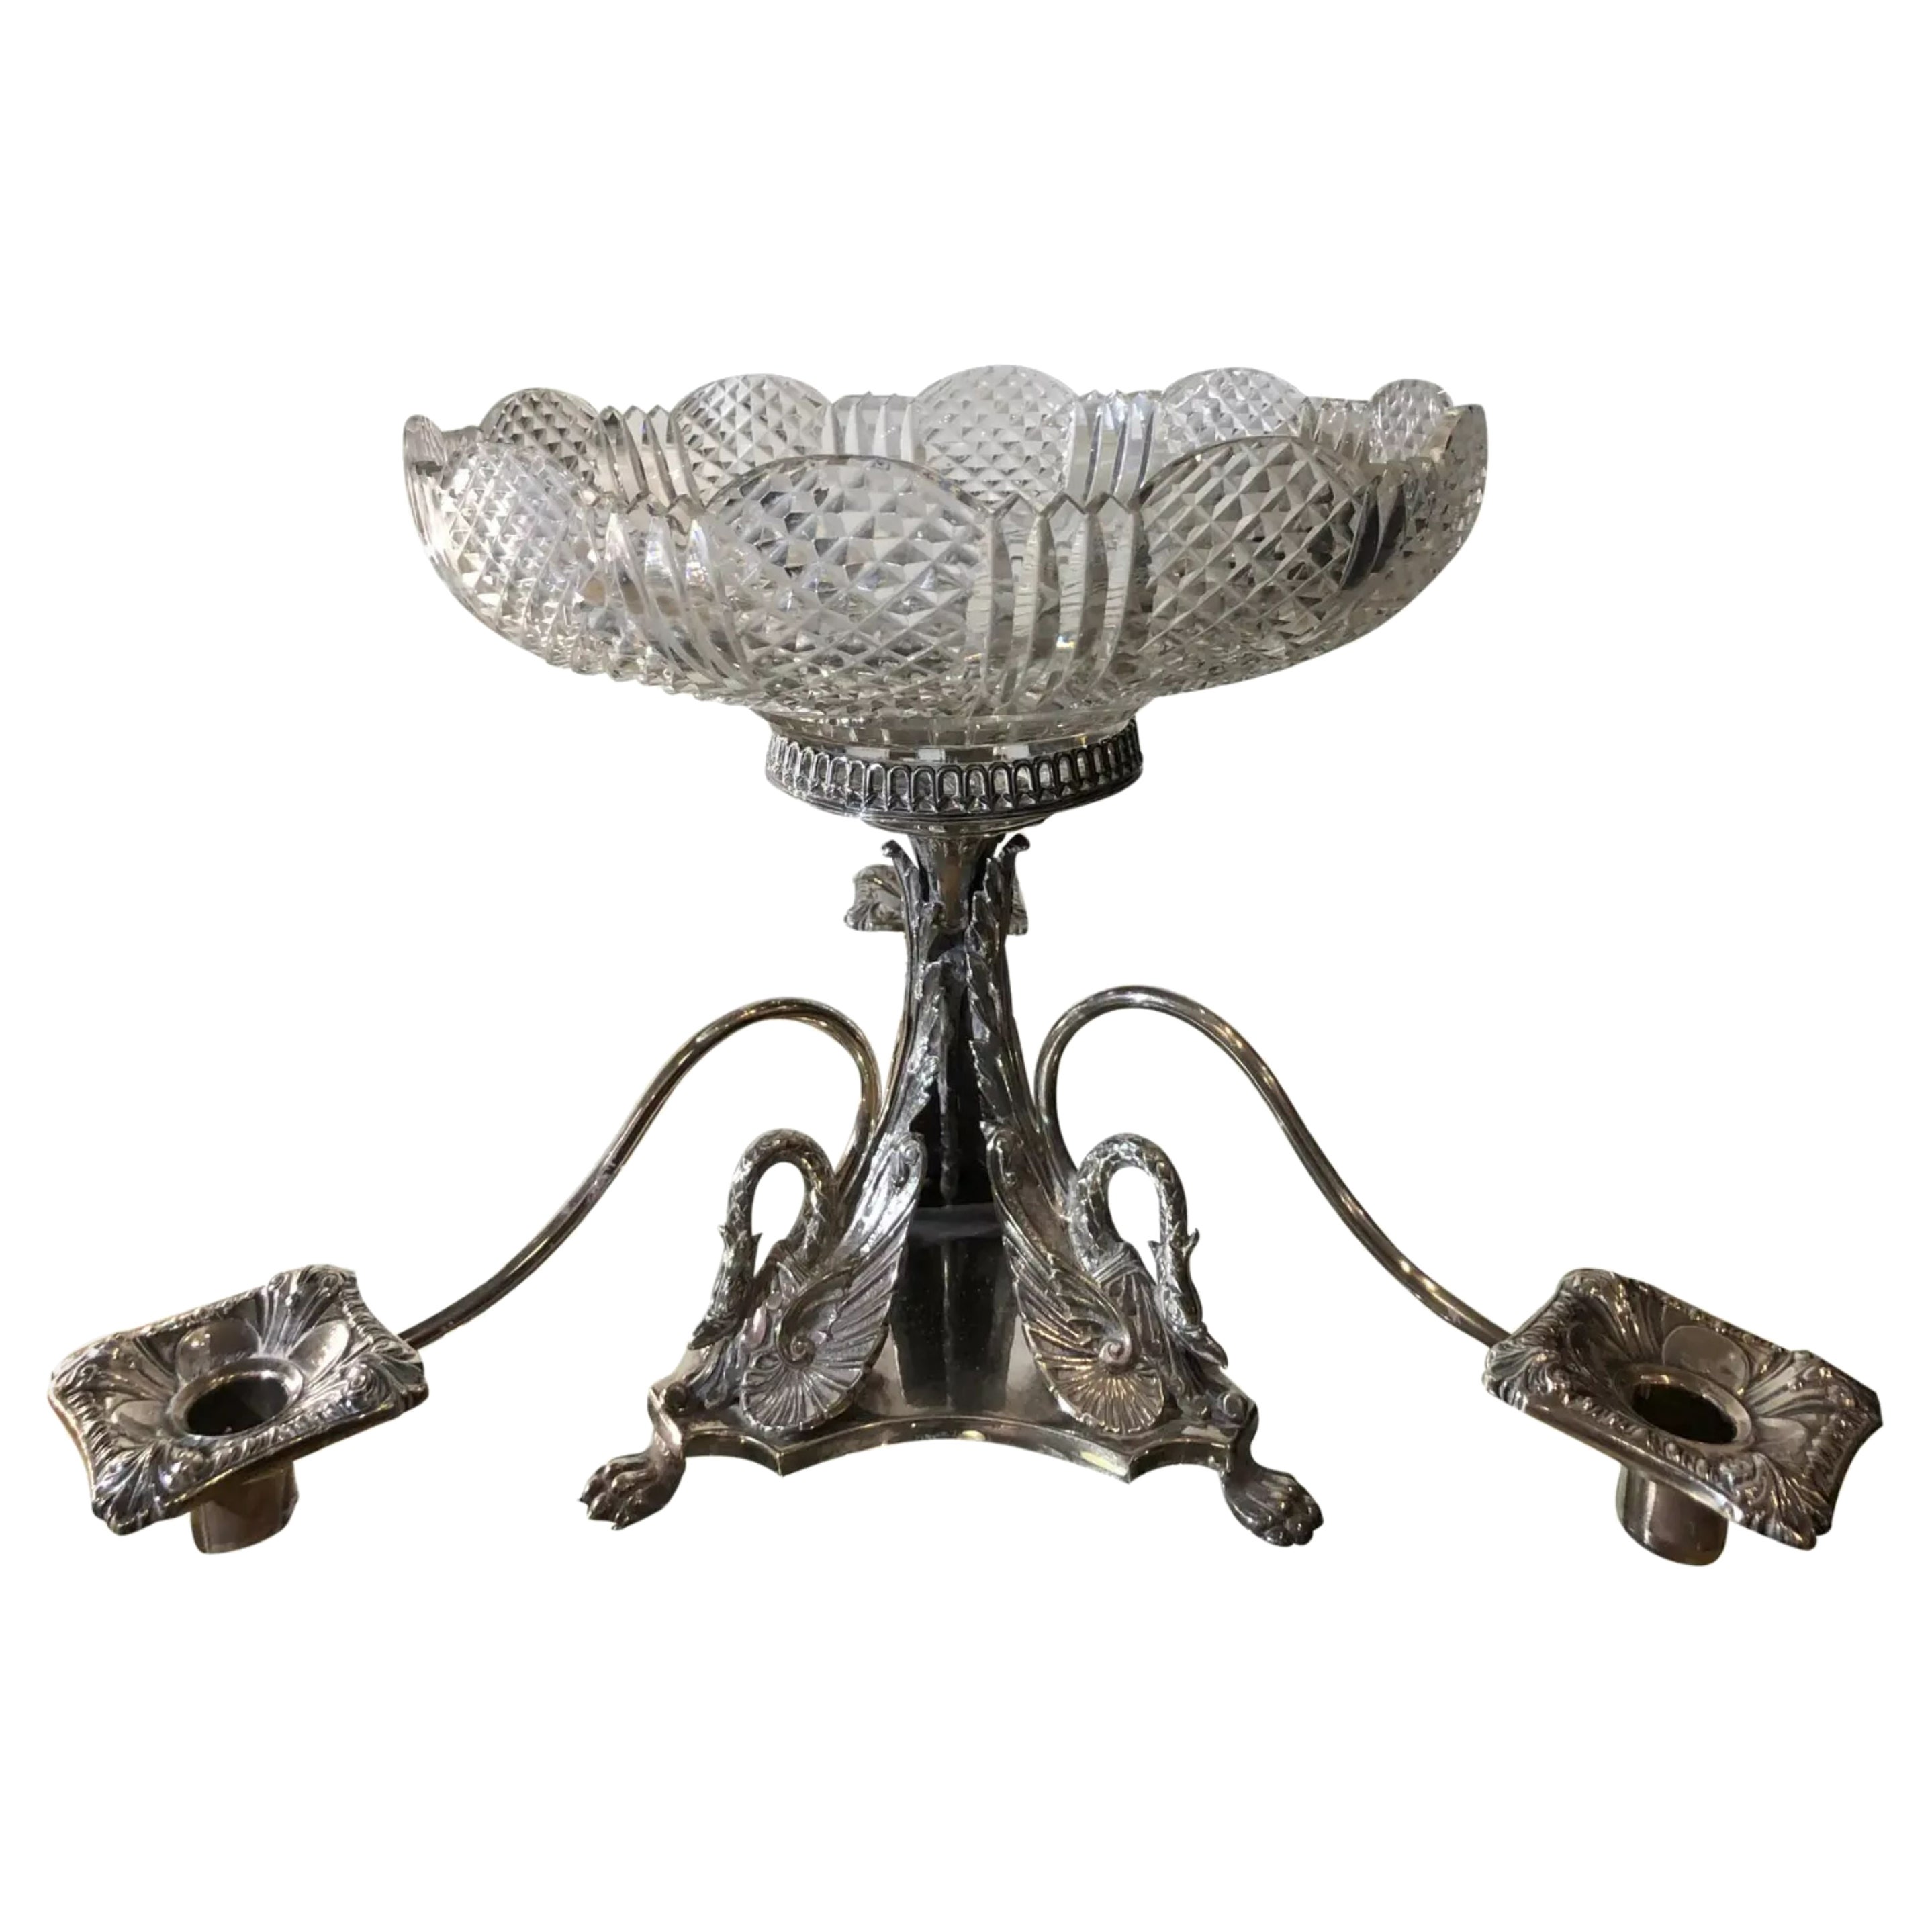 Antique English Silver Plate & Crystal Centerpiece, Mid-19th Century